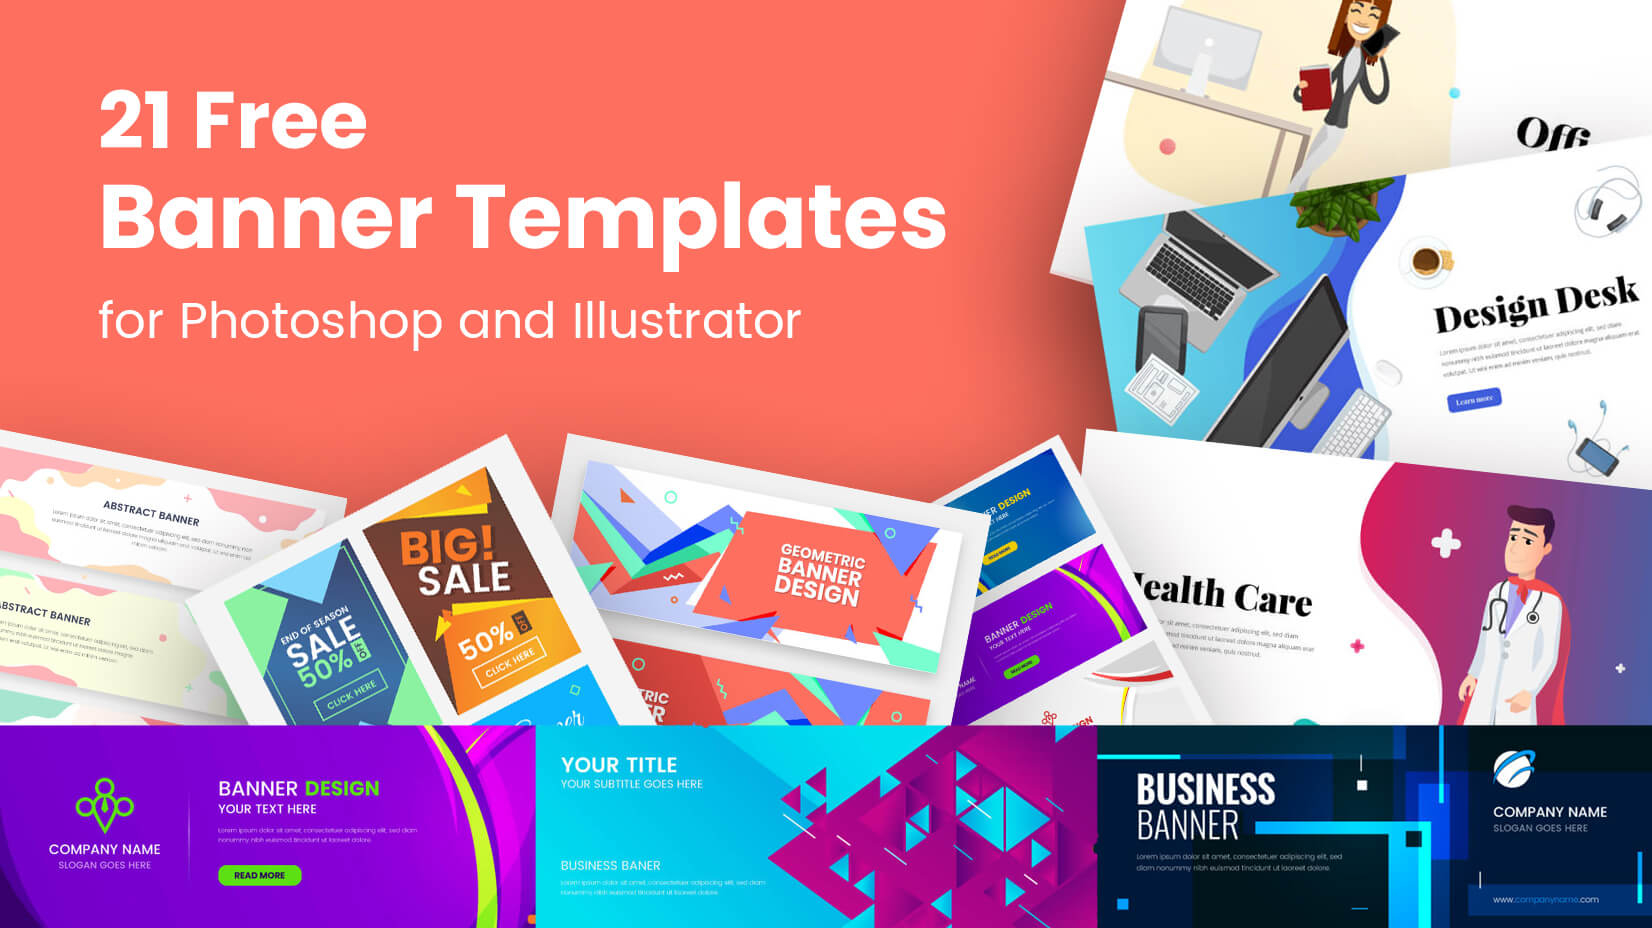 10 Free Banner Templates For Photoshop And Illustrator Inside Website Banner Templates Free Download